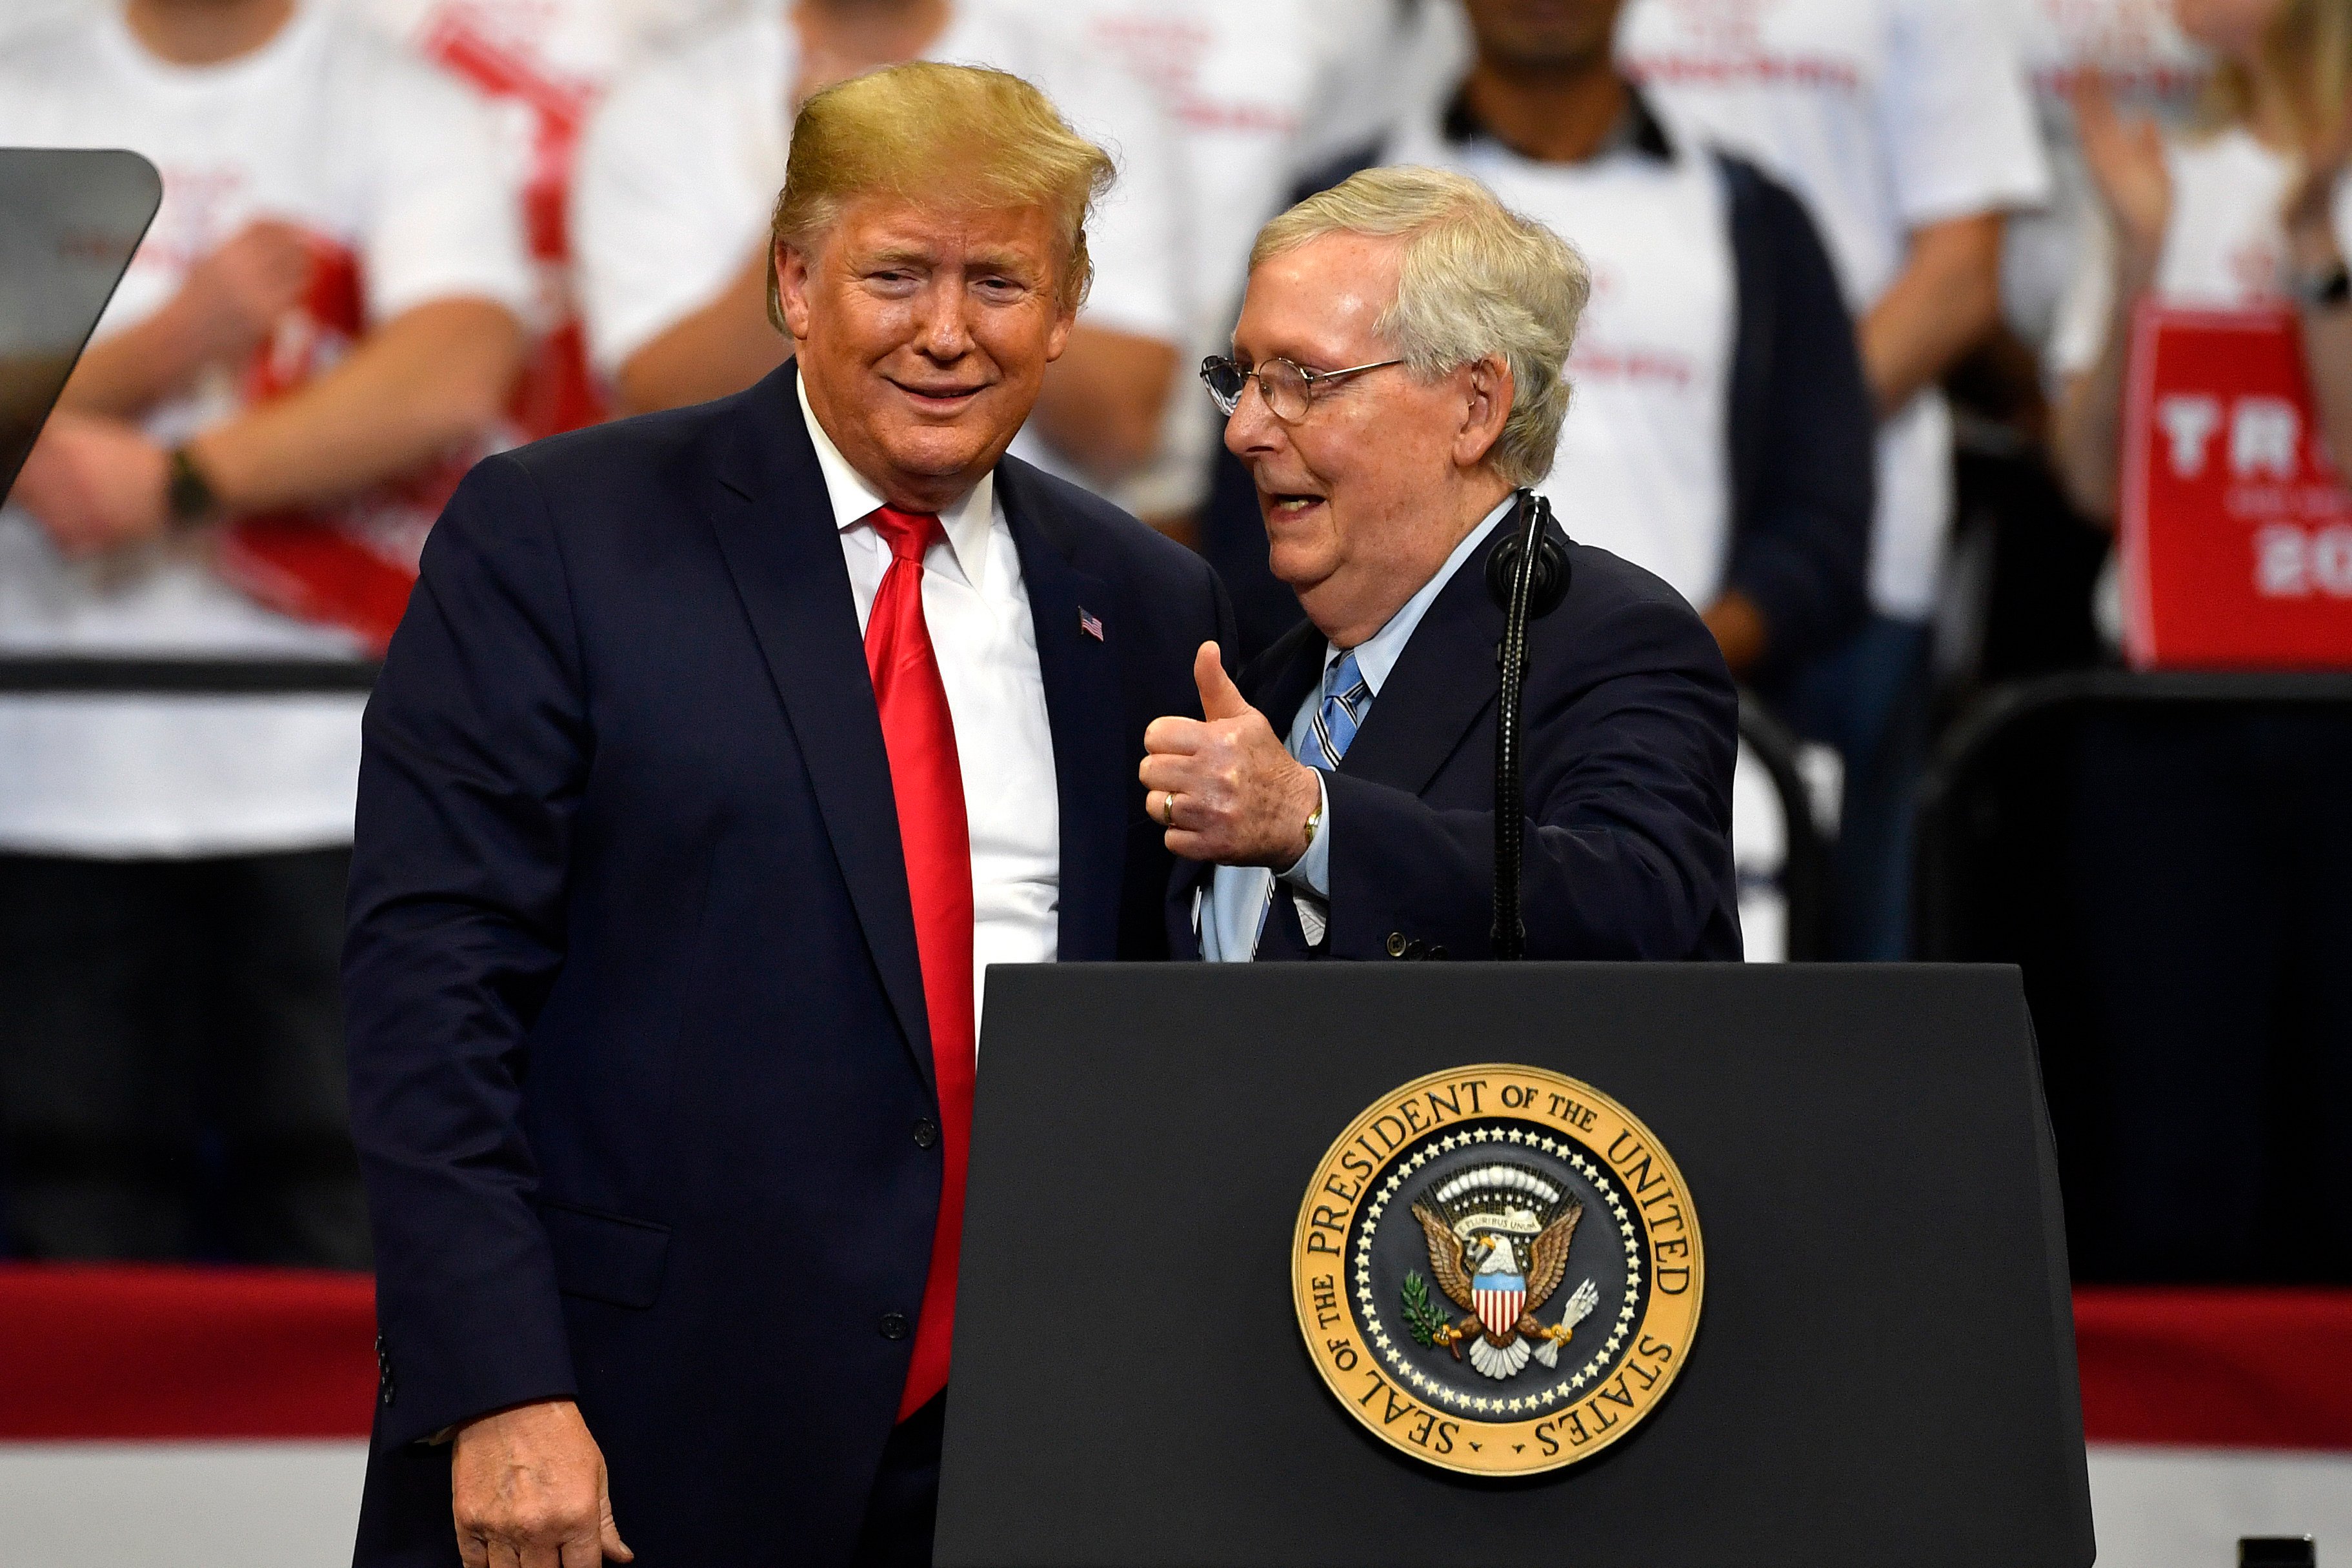 Then US President Donald Trump (left) and Republican Senator Mitch McConnell greet each other during a campaign rally in Lexington, Kentucky, in November 2019. Photo: AP